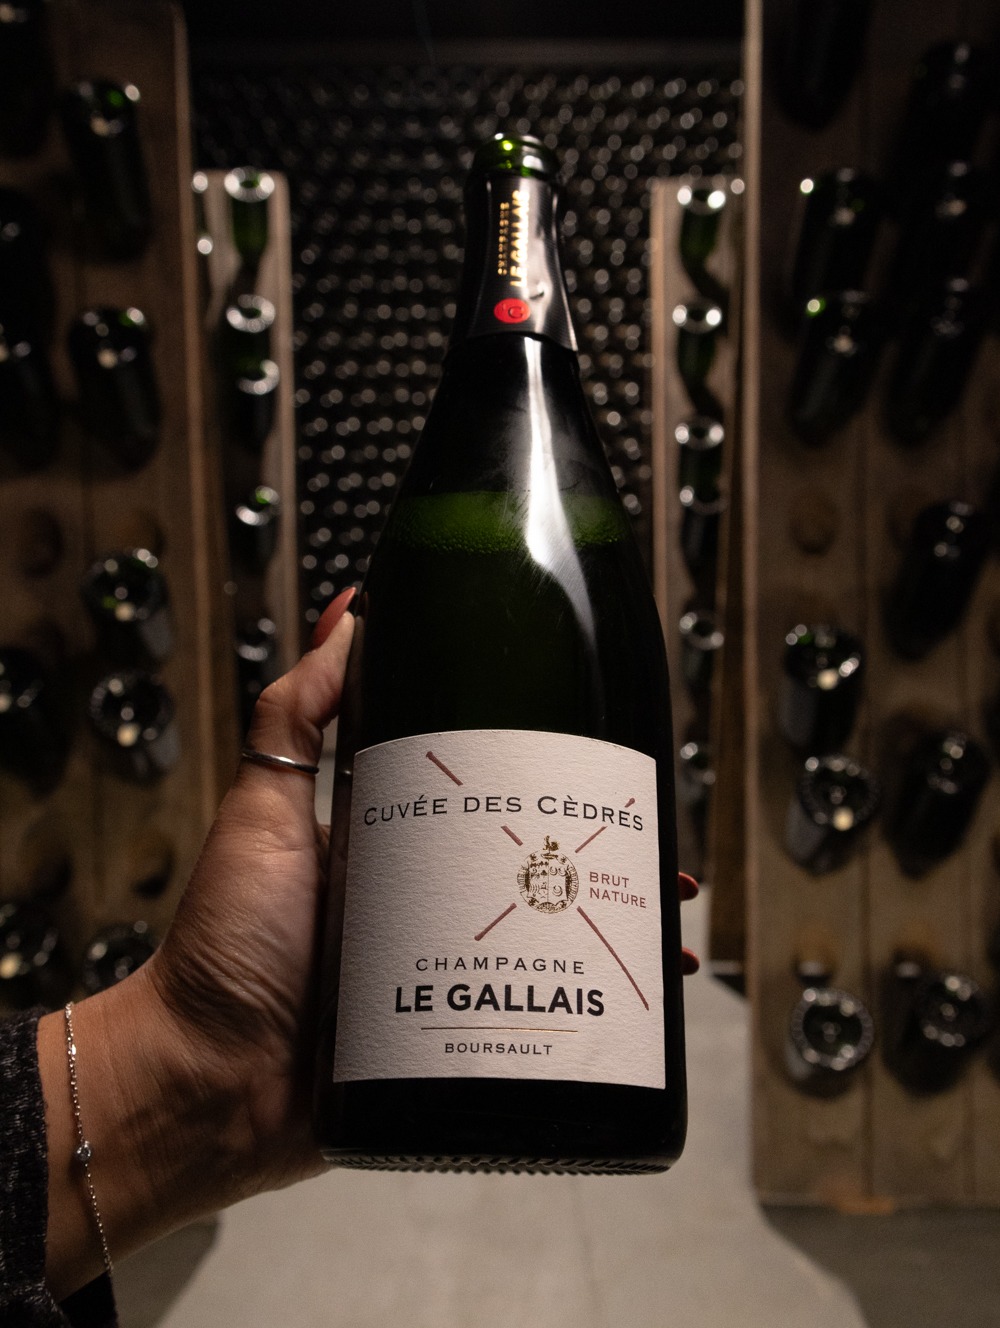 Champagne Le Gallais Cuvée des Cèdres Brut Nature NV																	We’re off to Madame Clicquot's old stomping grounds in Boursault for a spectacular find on 92 point Brut Nature!